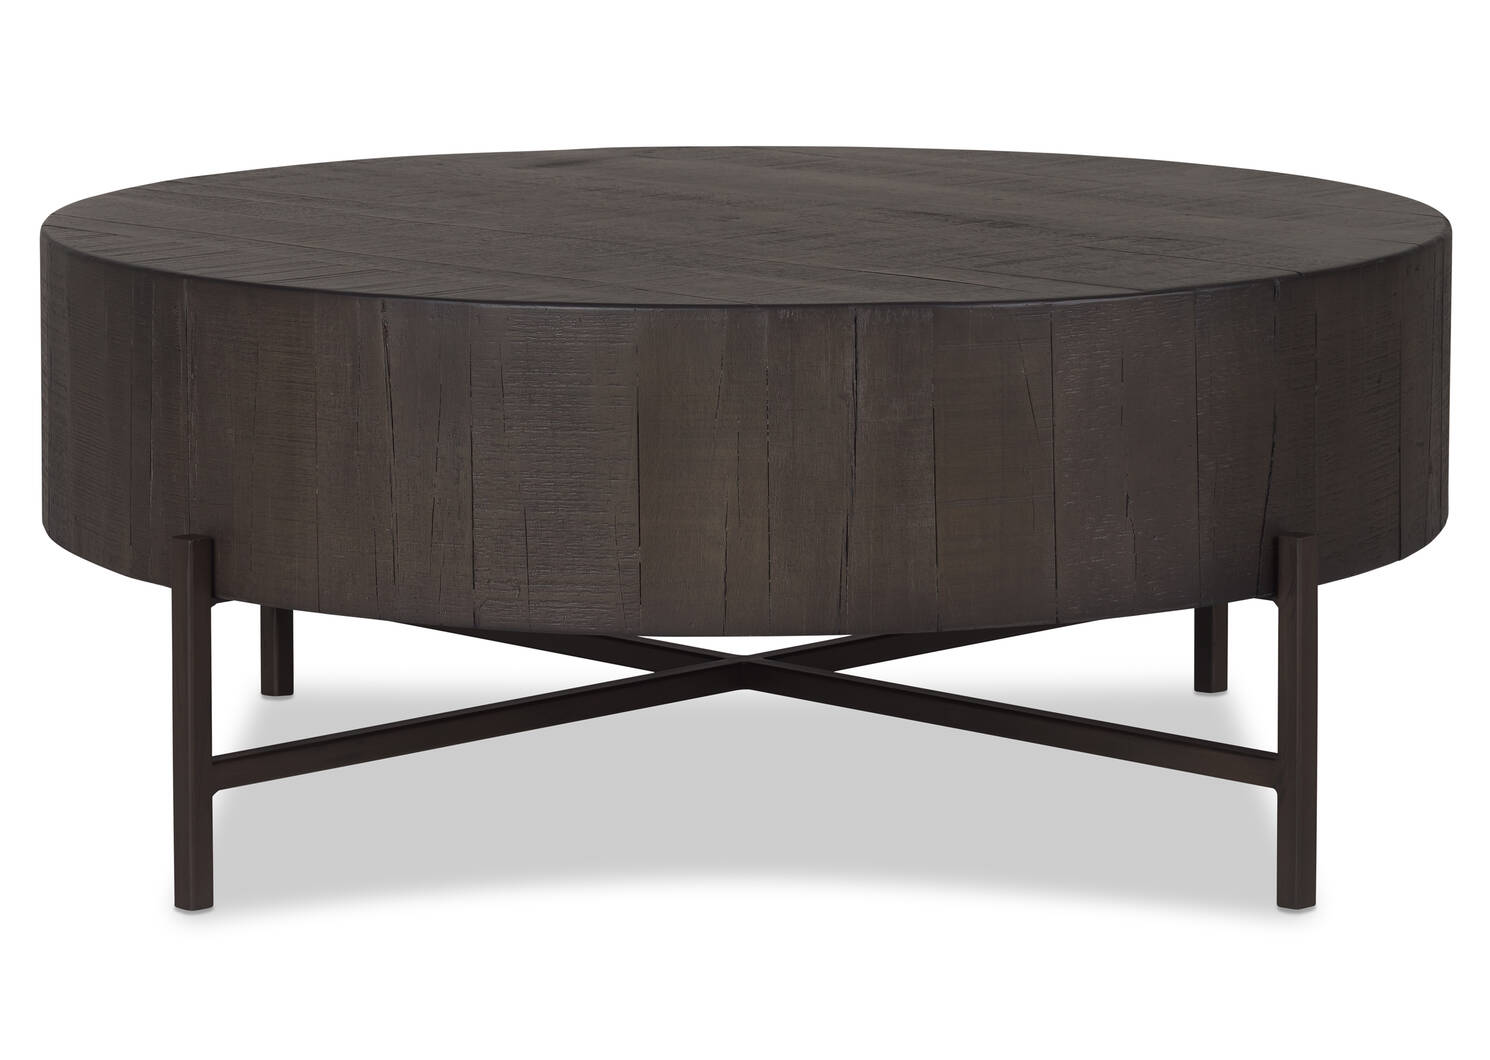 Table basse Atwell -Lowry cendré